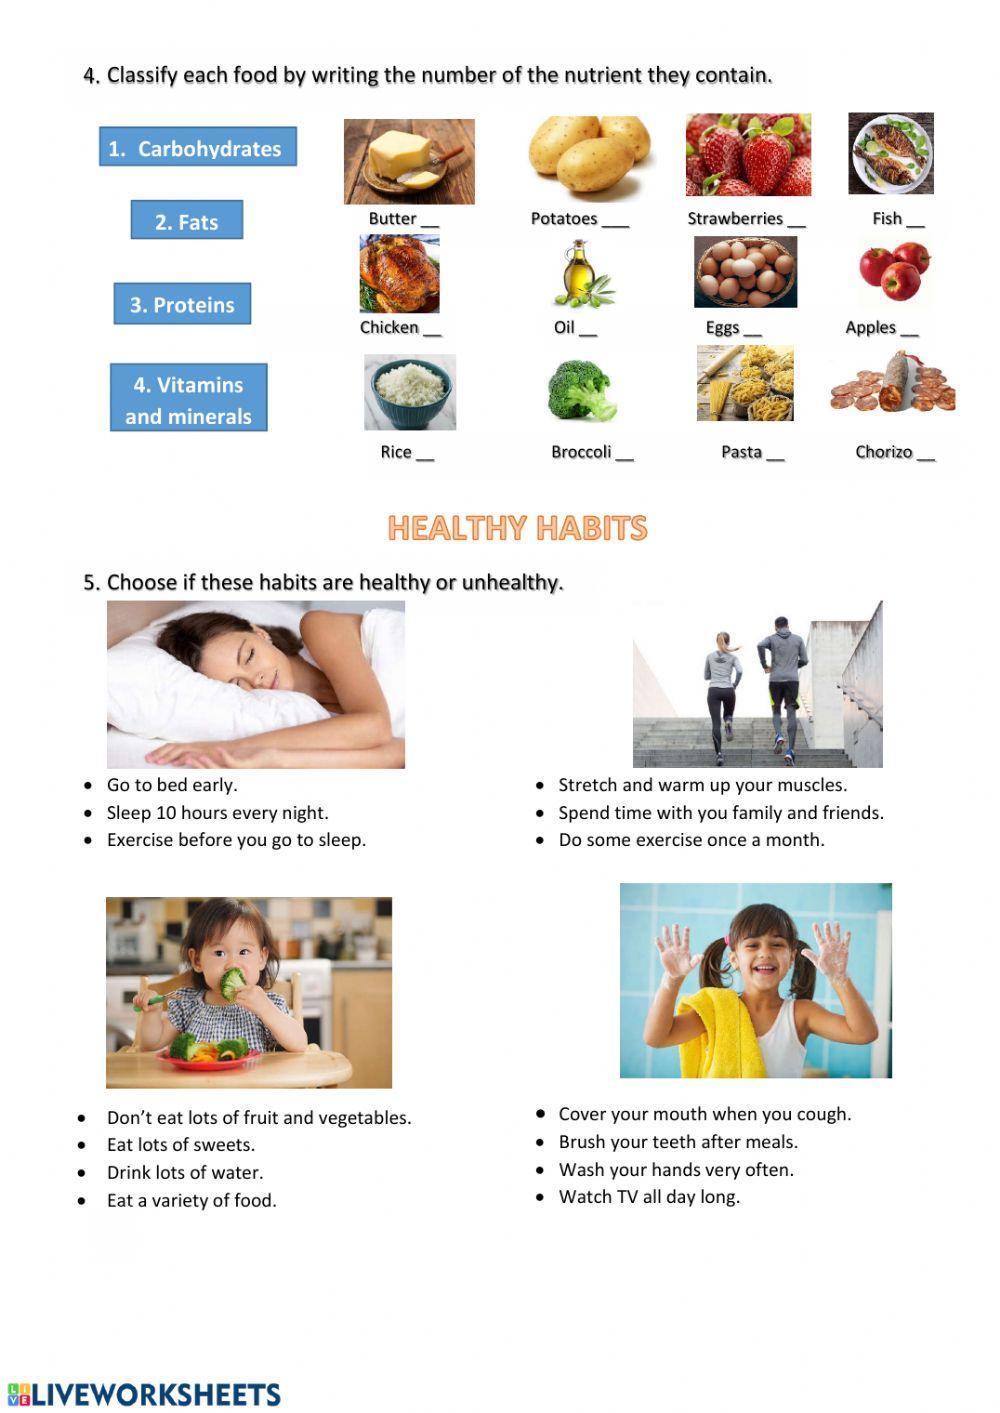 Nutrients in food and healthy habits